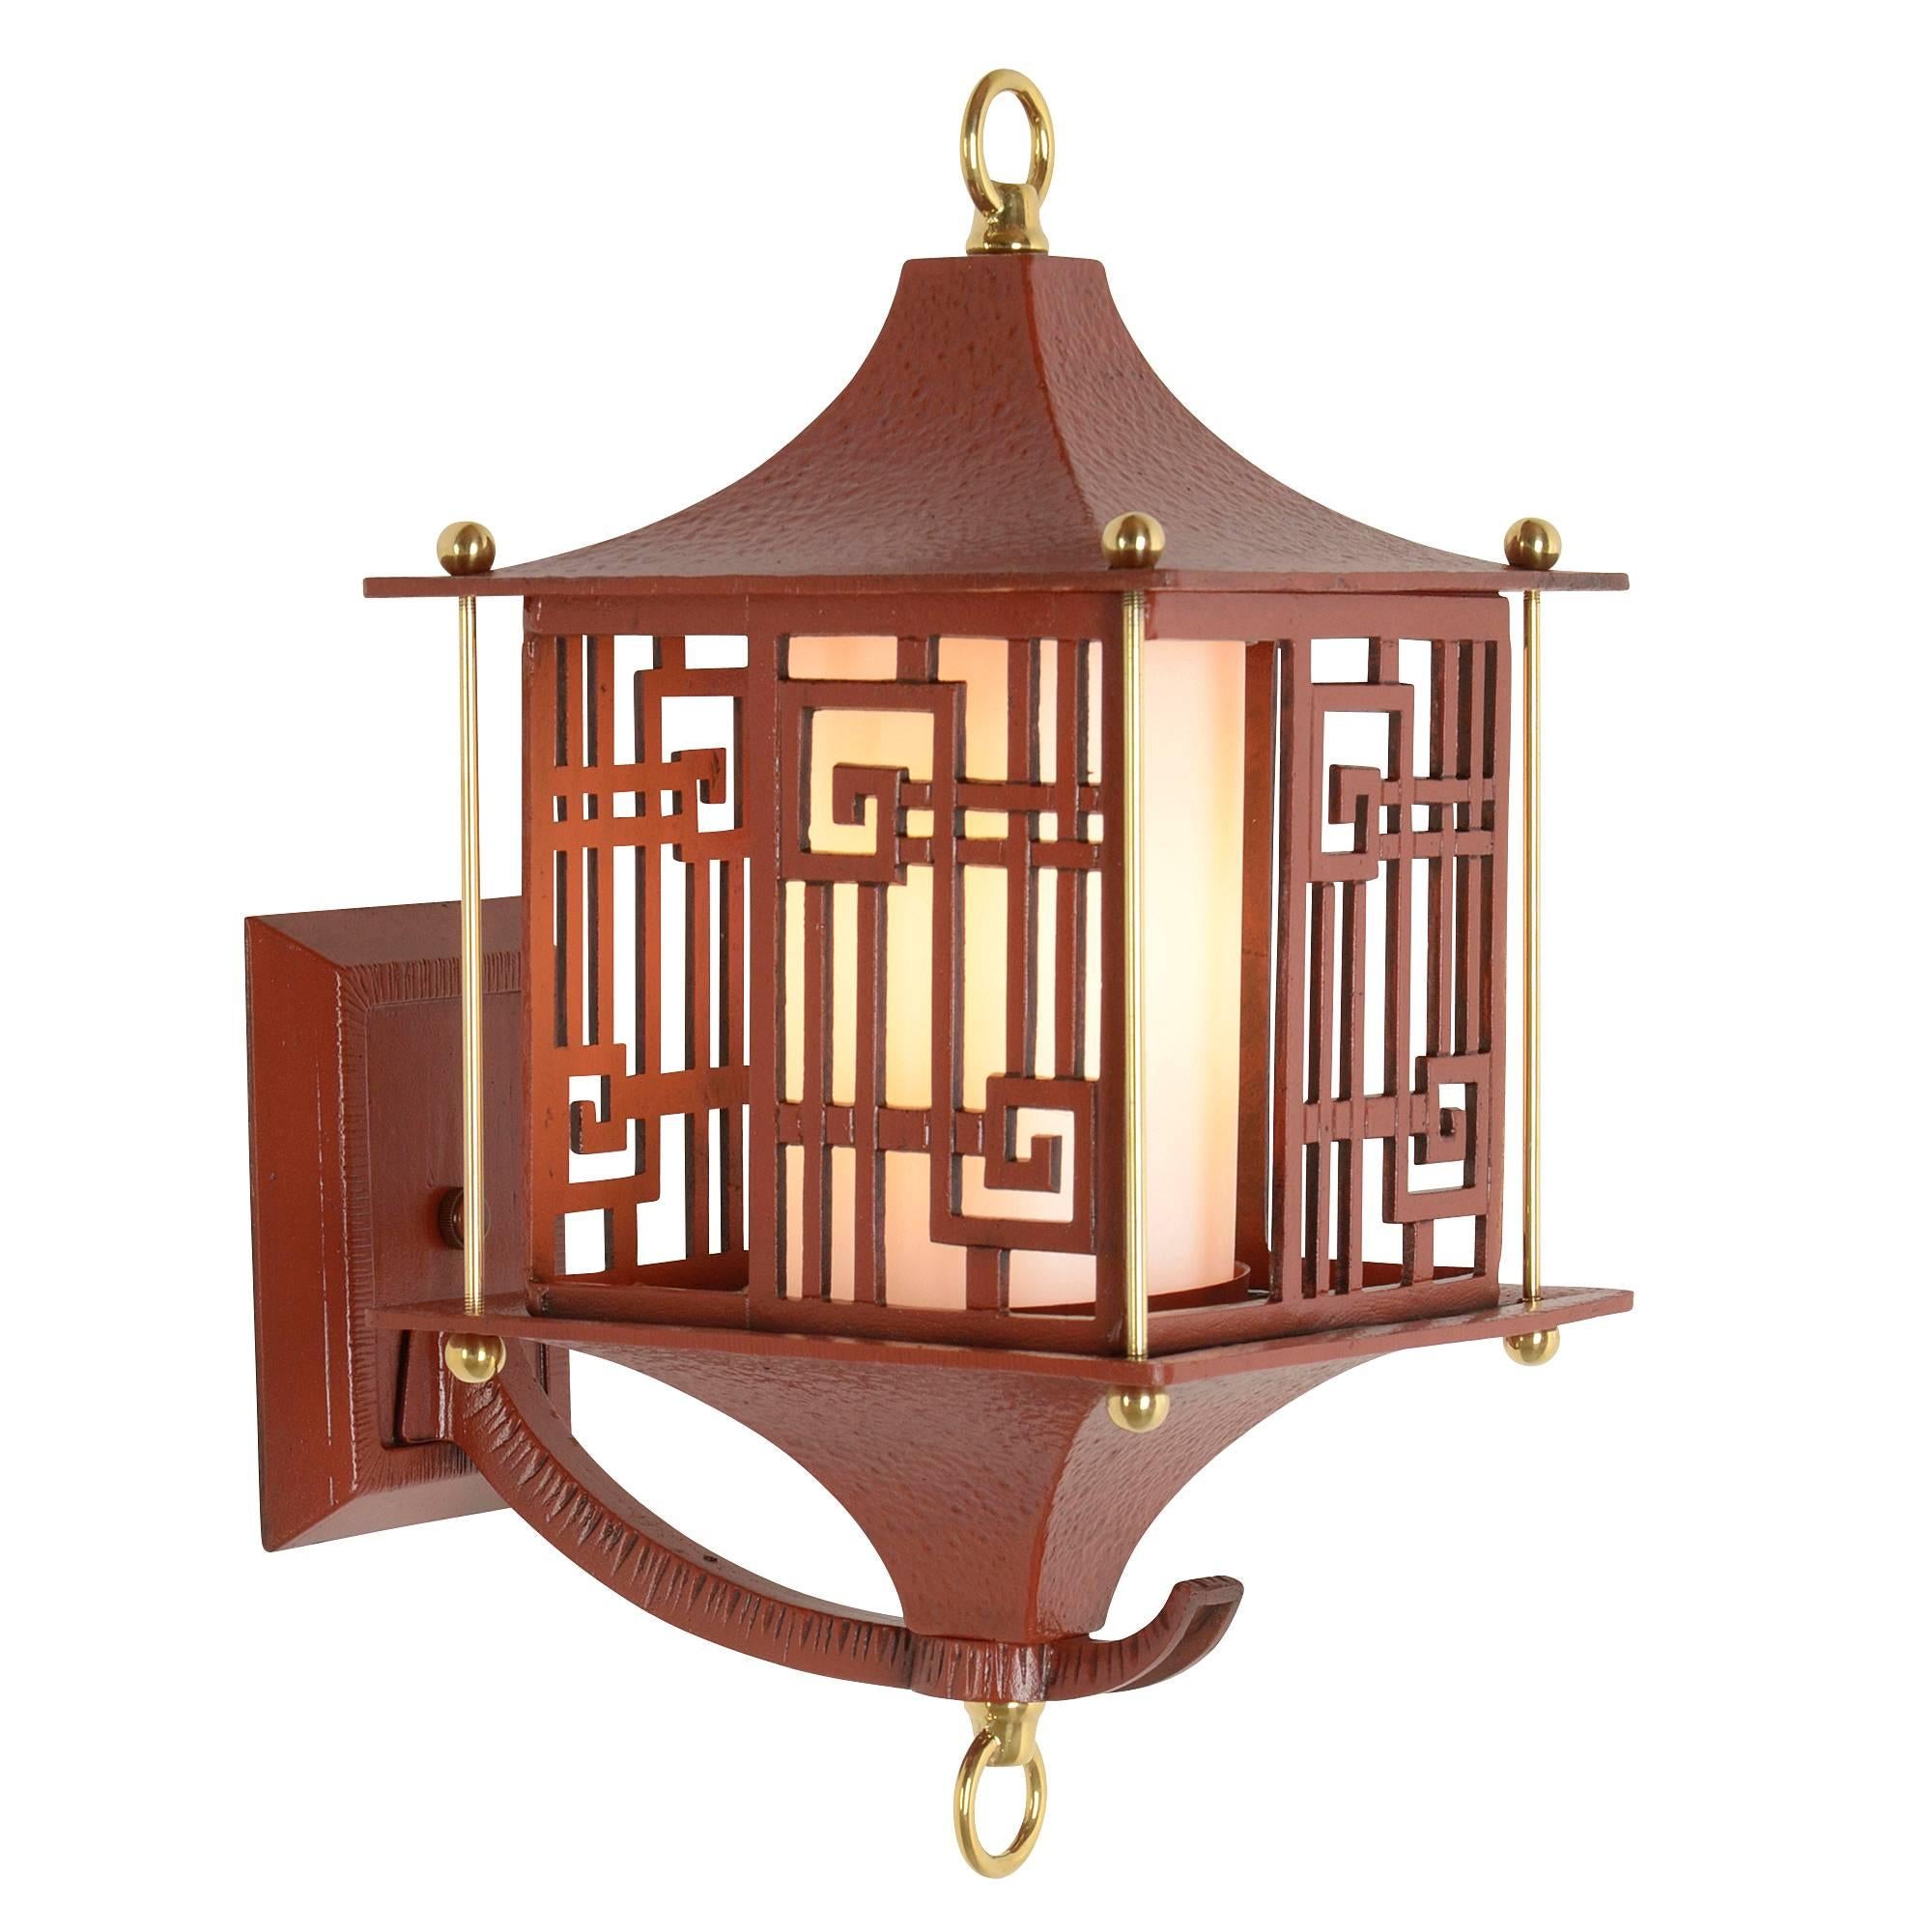 Nothing quite matched the exotic allure and romance of themed international dining establishments in the decade or two following WWII, and it is our best guess that this well-made cast lantern fixture was designed and sold especially for Chinese